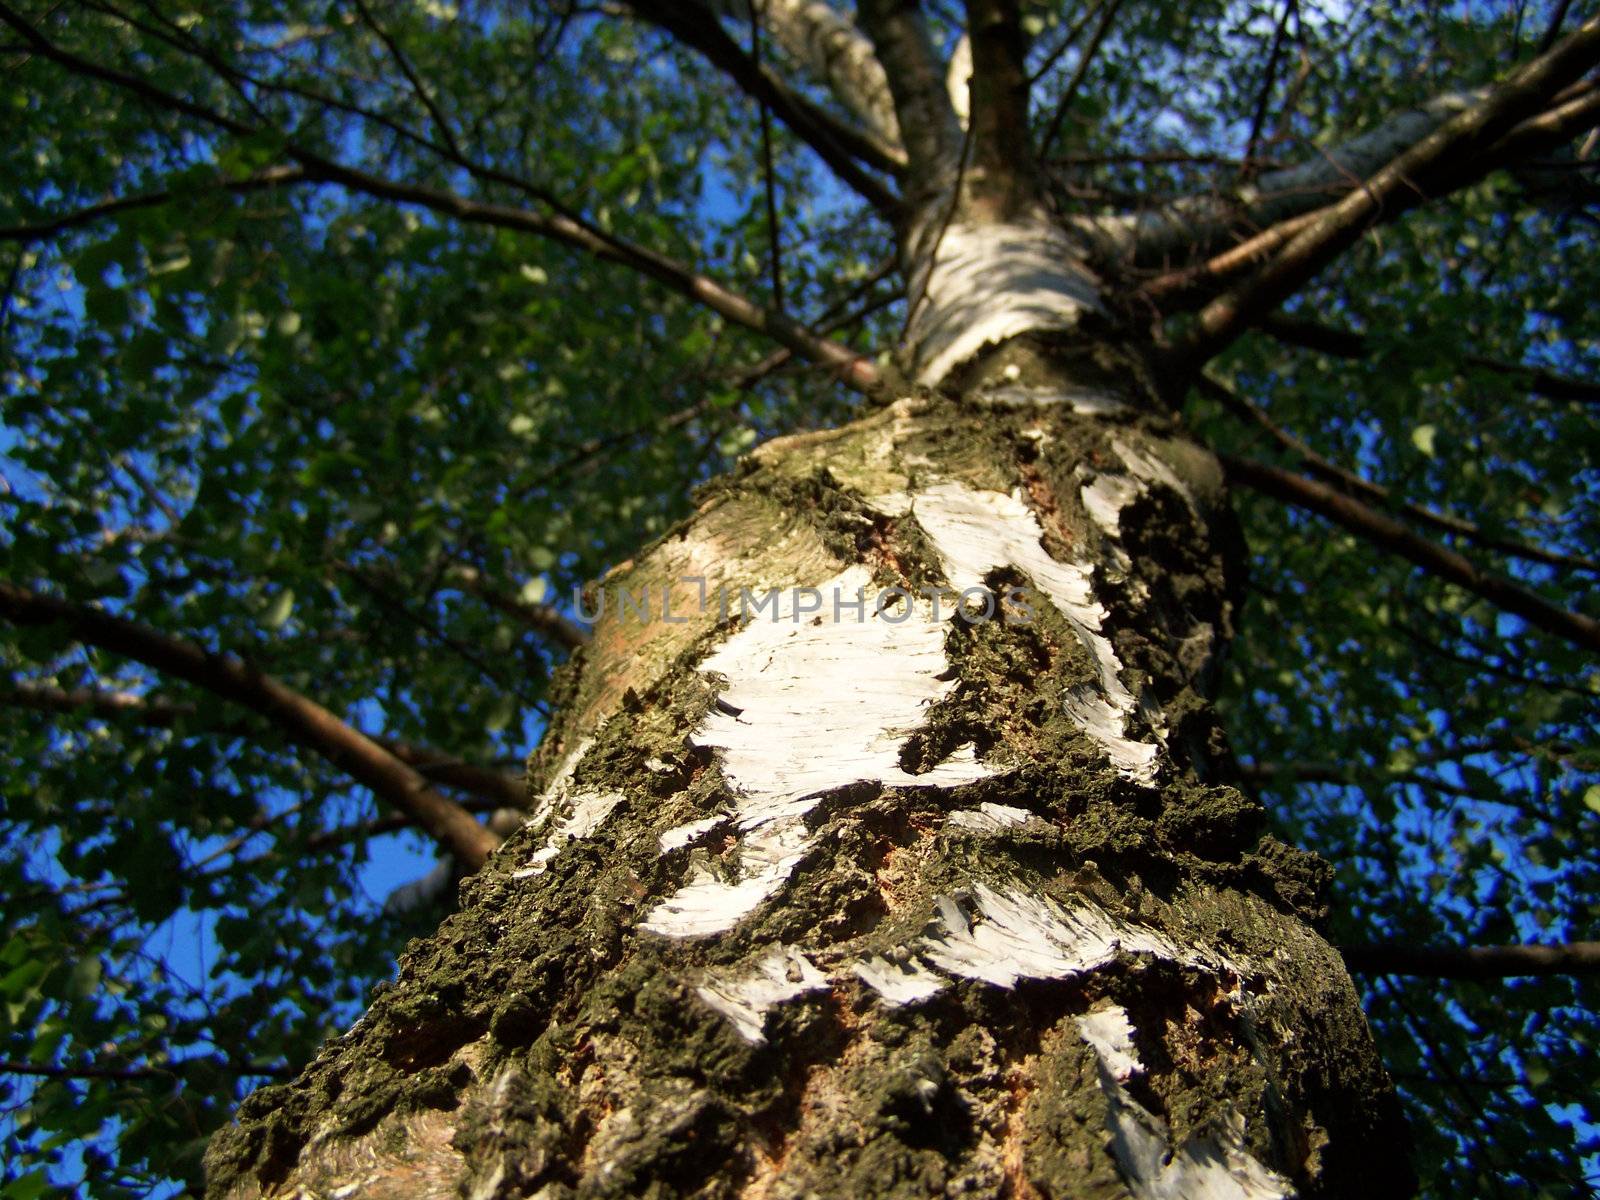 detail of a tree